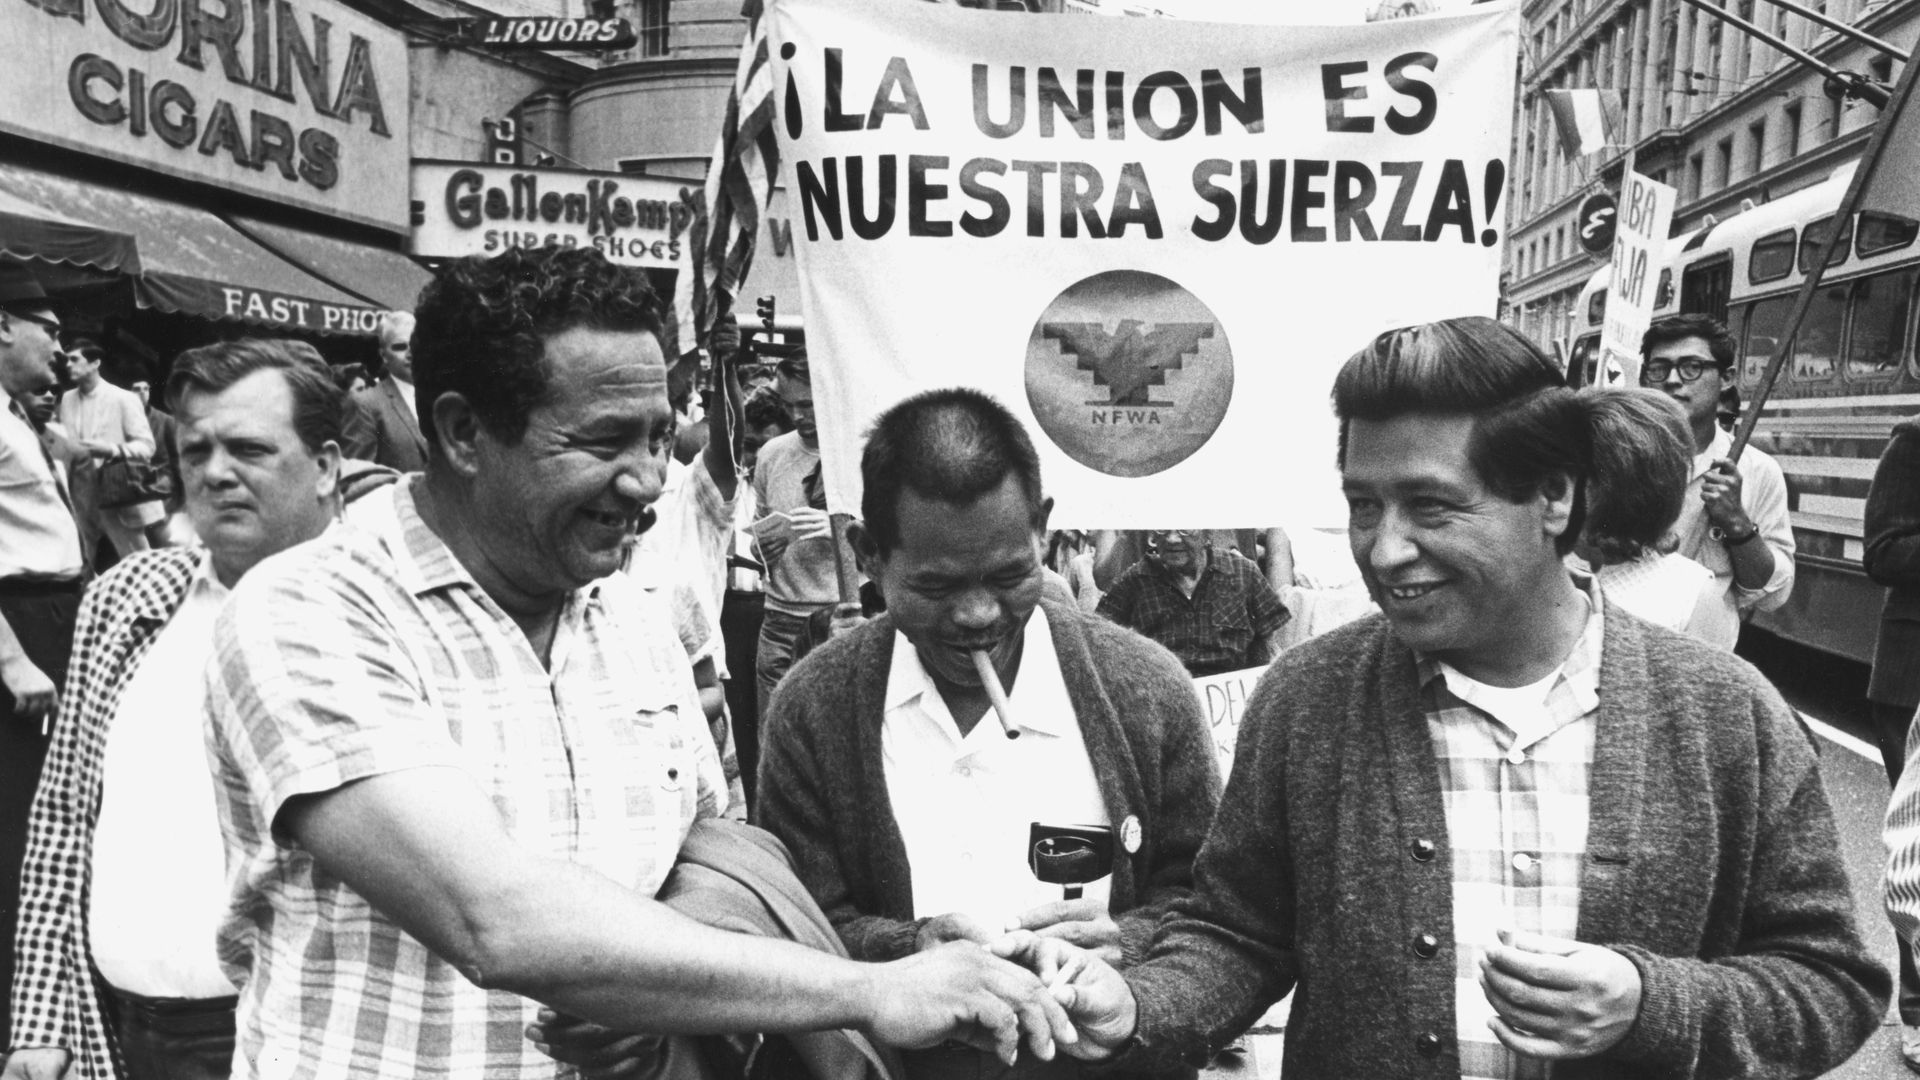 A black and white photo shows three men in the front of a protest line, all shaking hands. The man on the right is activist Cesar Chavez and in the middle is Larry Itliong, who is smoking a cigarette